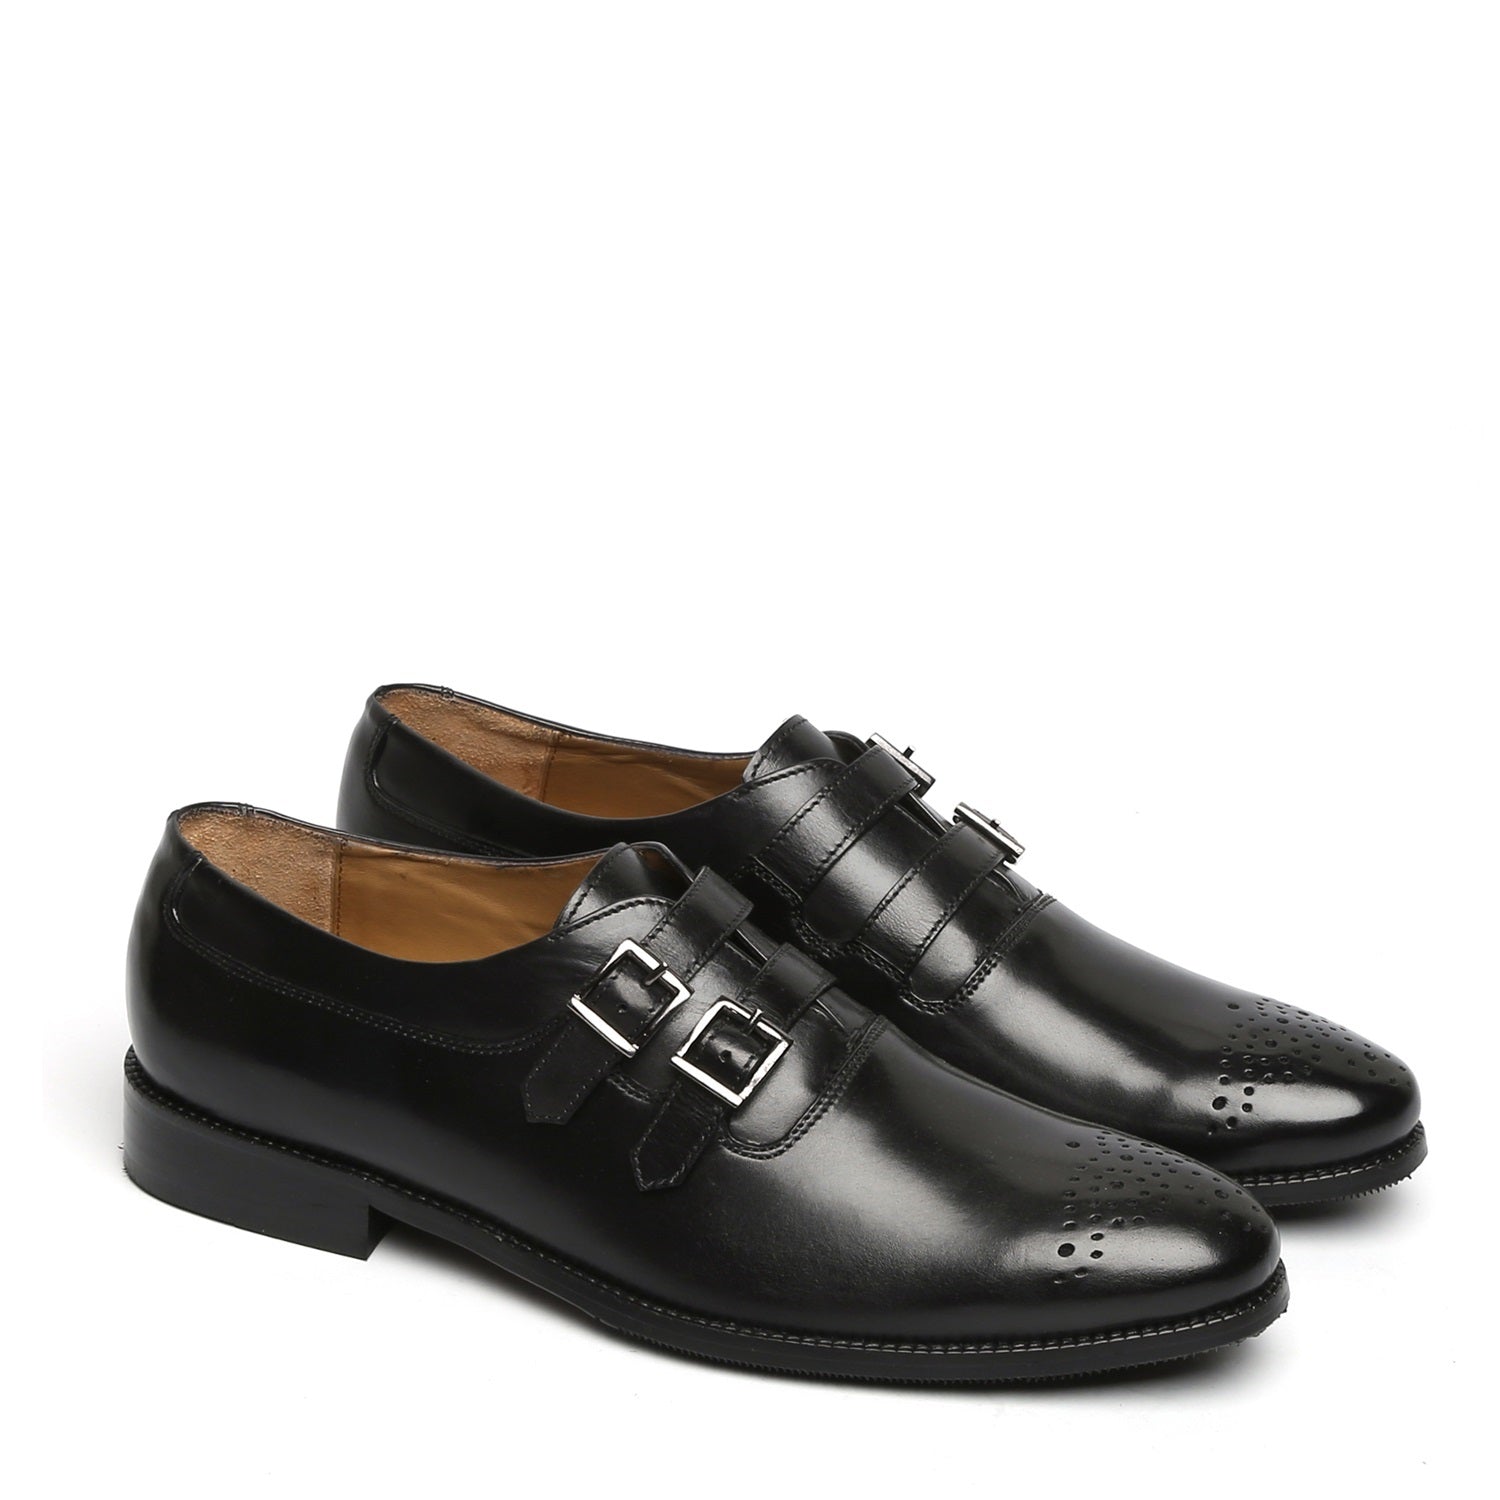 BLACK PARALLEL DOUBLE MONK STRAPS LEATHER FORMAL SHOES BY BRUNE & BARESKIN